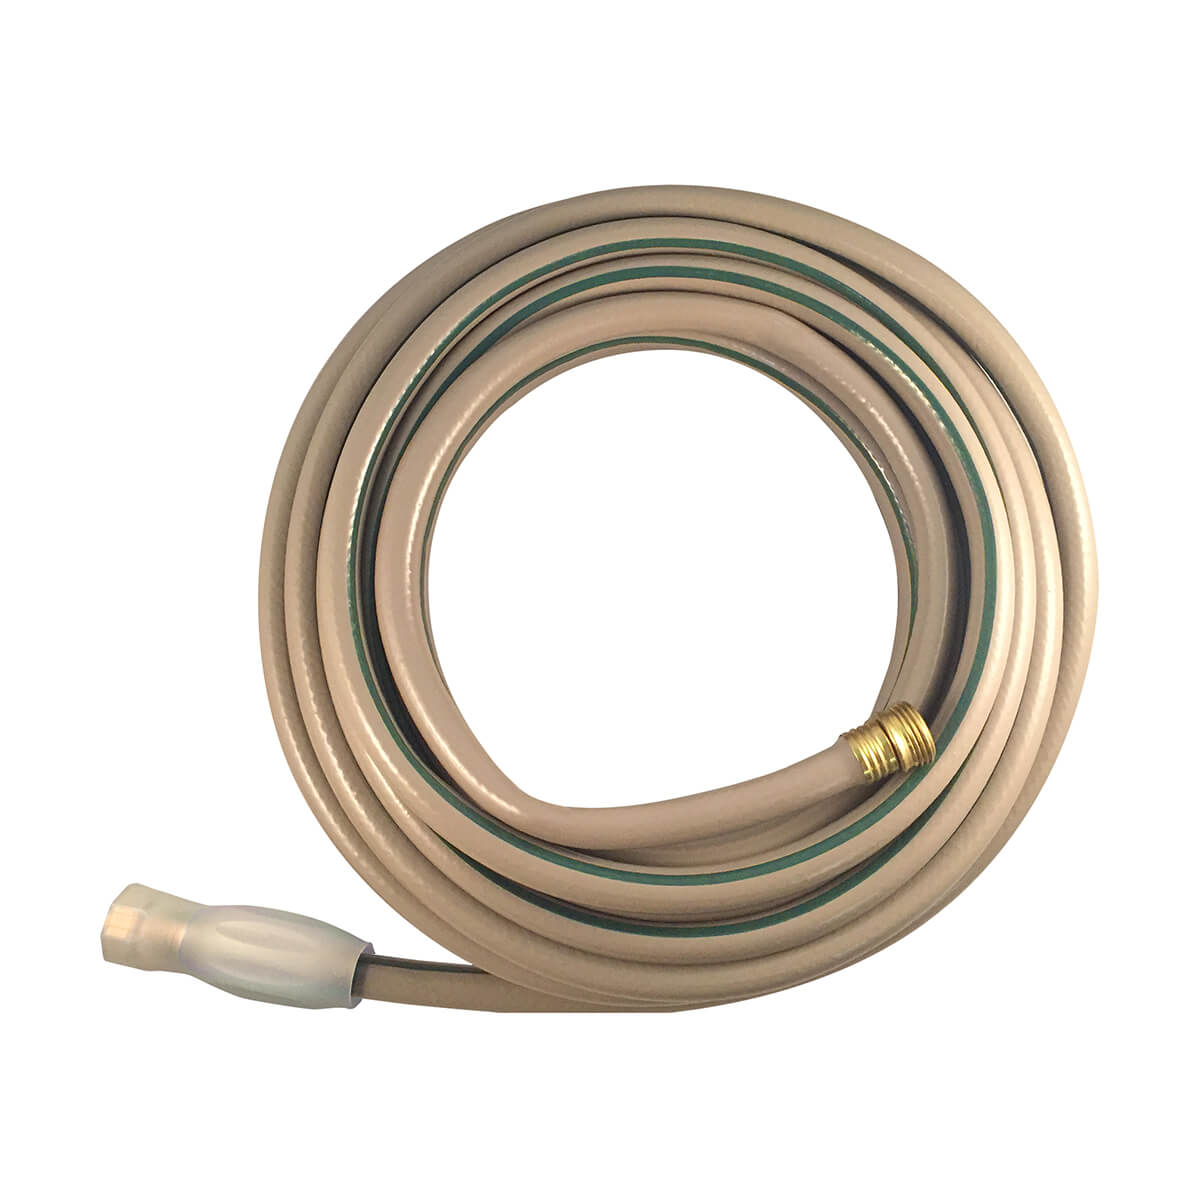 Hose Medium Duty with Grip - 5/8-in x 50-ft